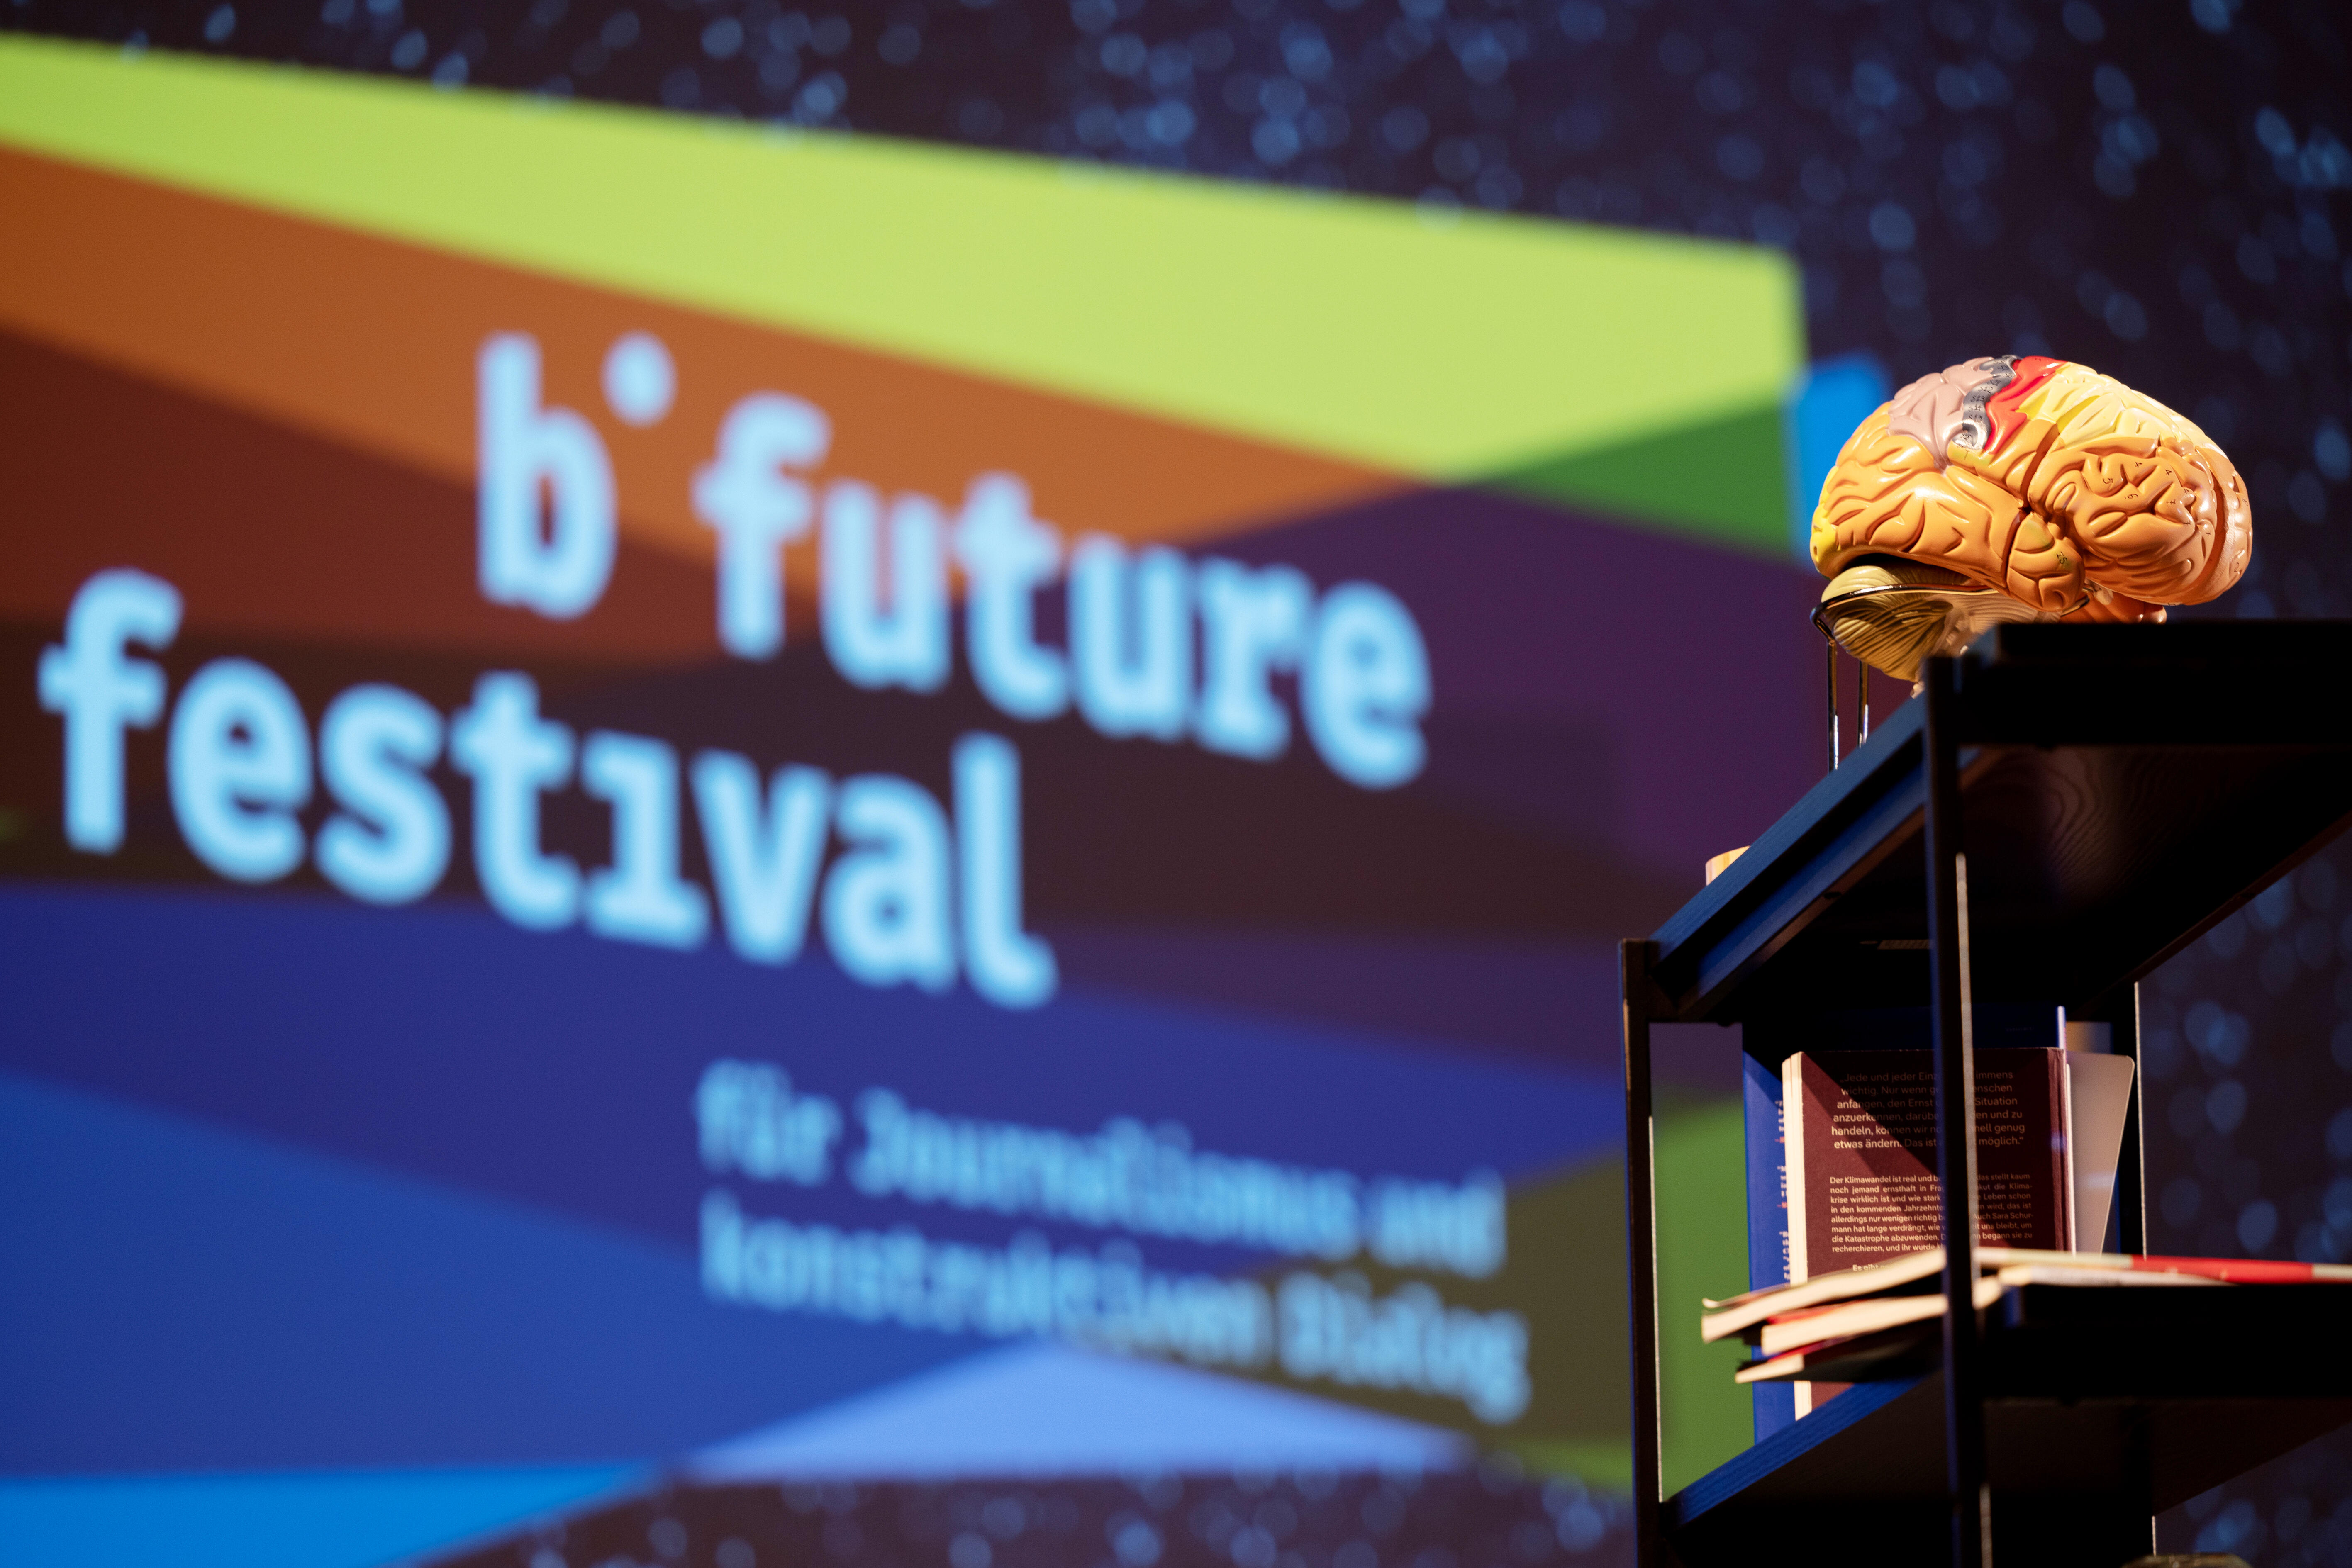 The presentation stage with the logo of the b-future festival in the background. In the foreground, there is a 3D model of a human brain.